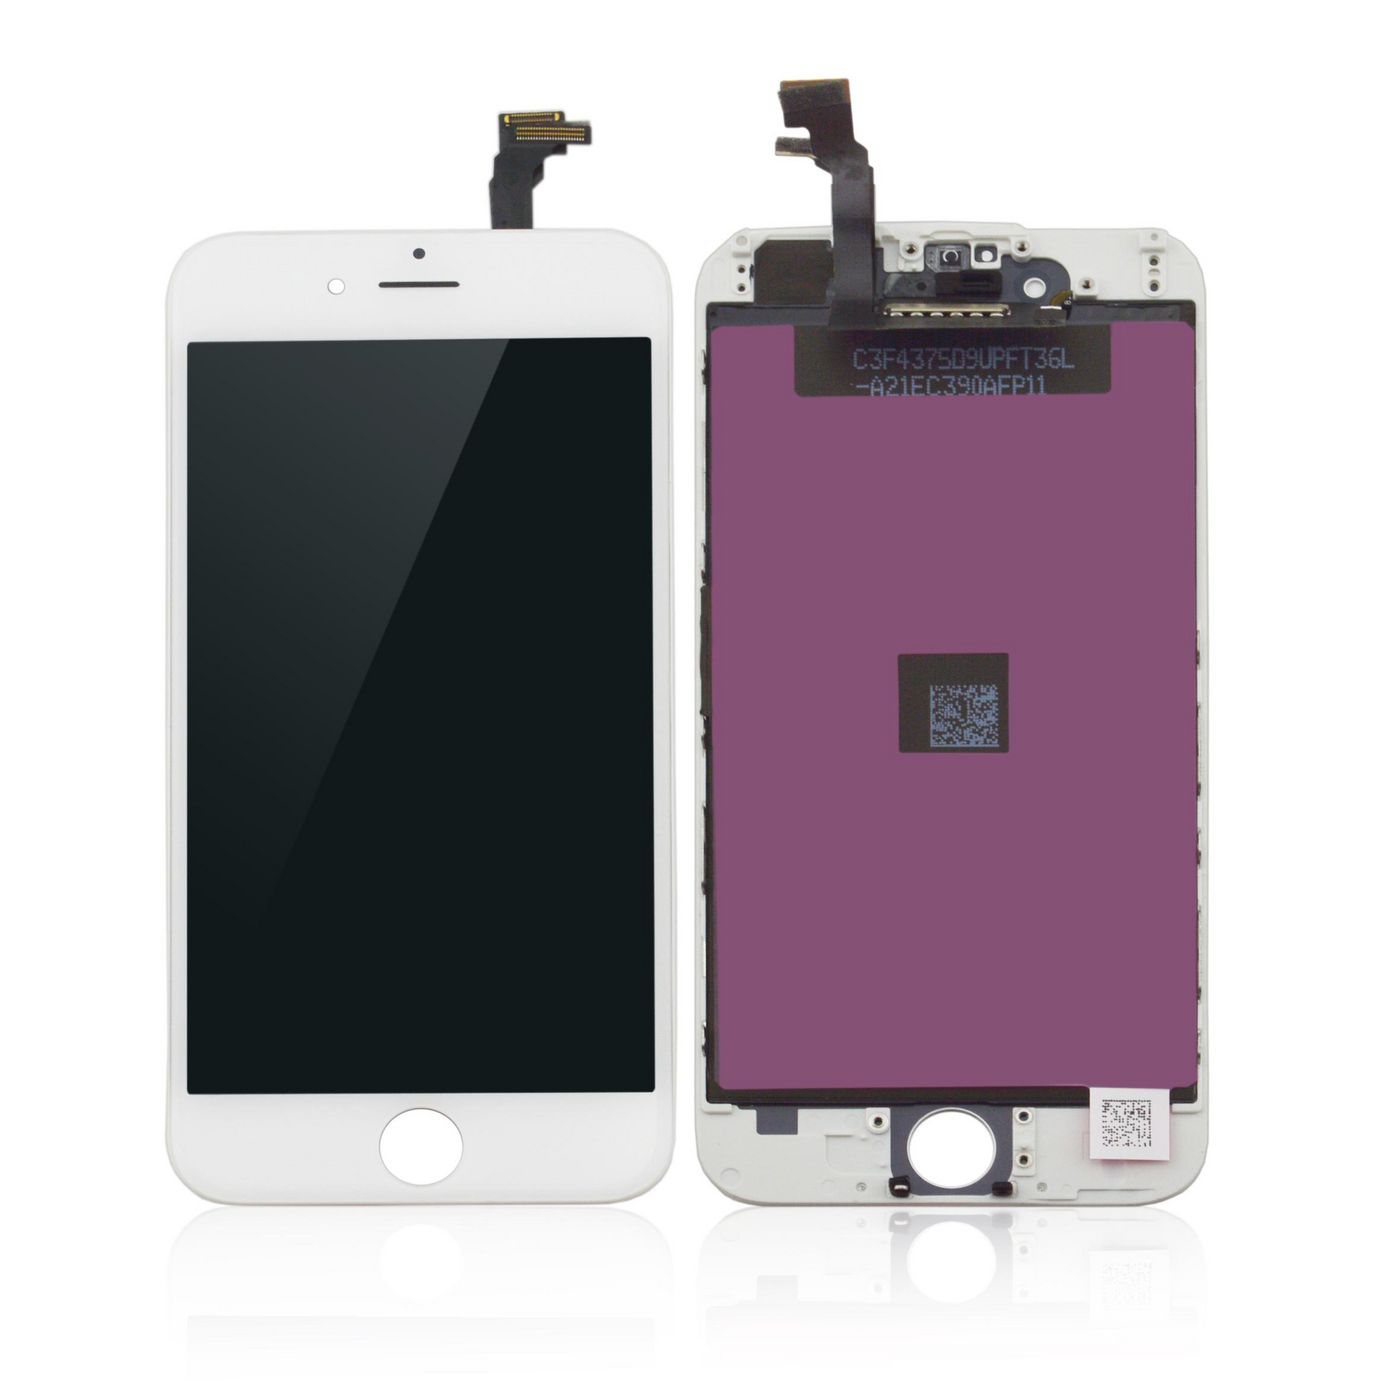 CoreParts MOBX-IPC6G-LCD-W LCD Screen for iPhone 6 White 